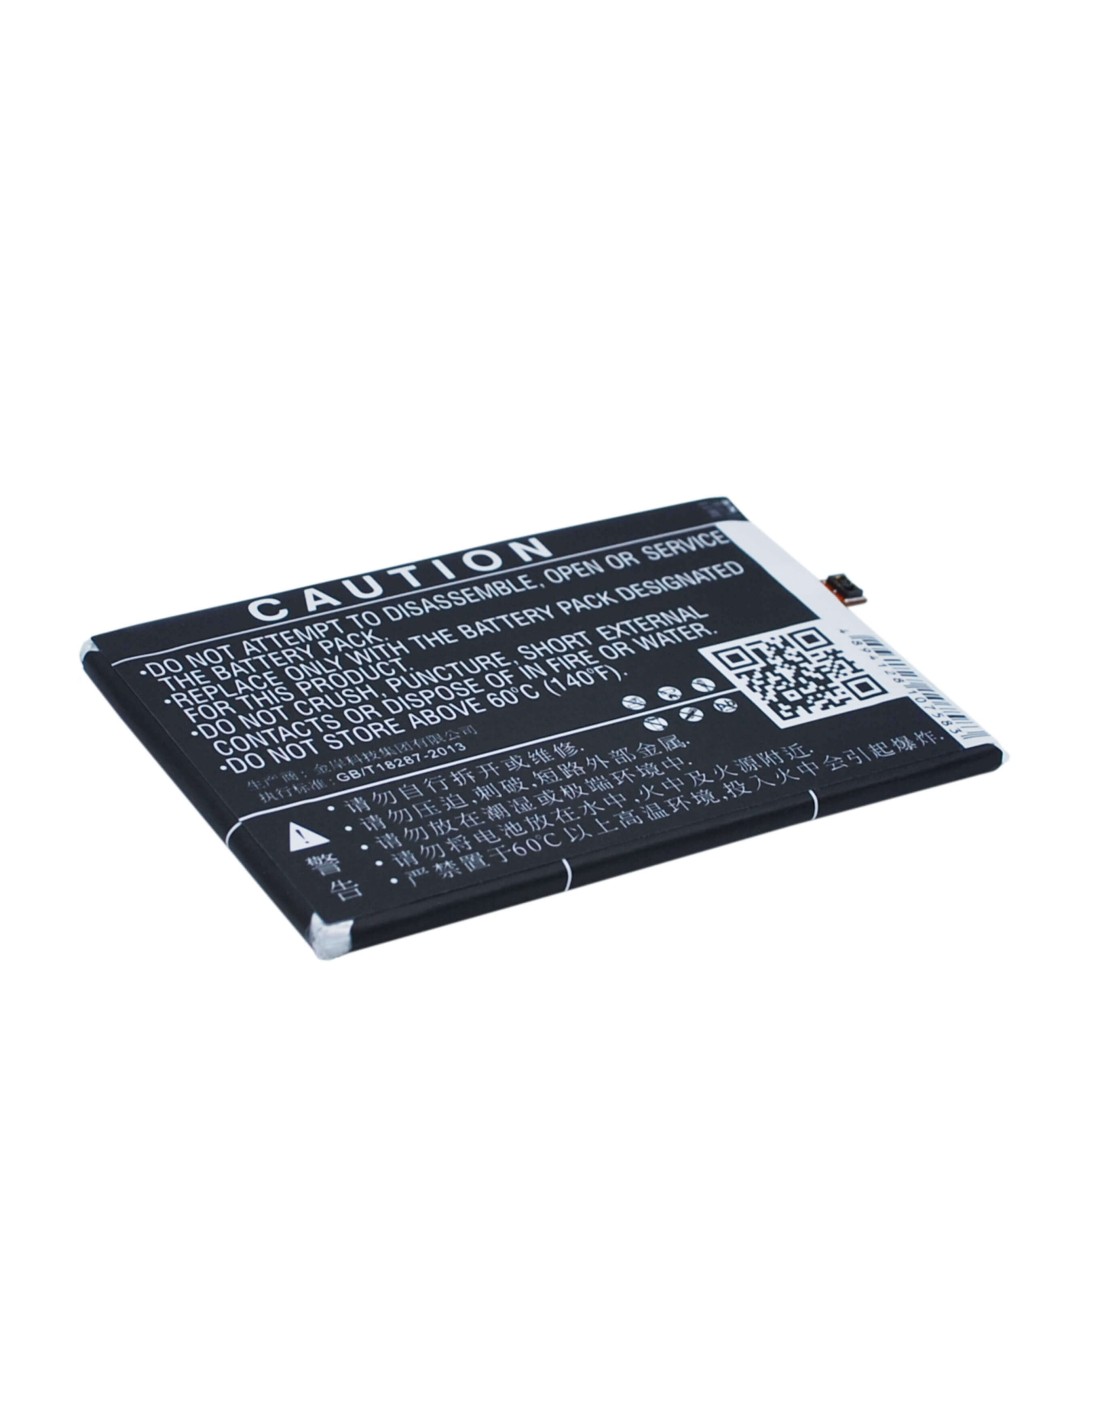 Battery for Coolpad Y75, Y76, Y80D 3.8V, 2500mAh - 9.50Wh